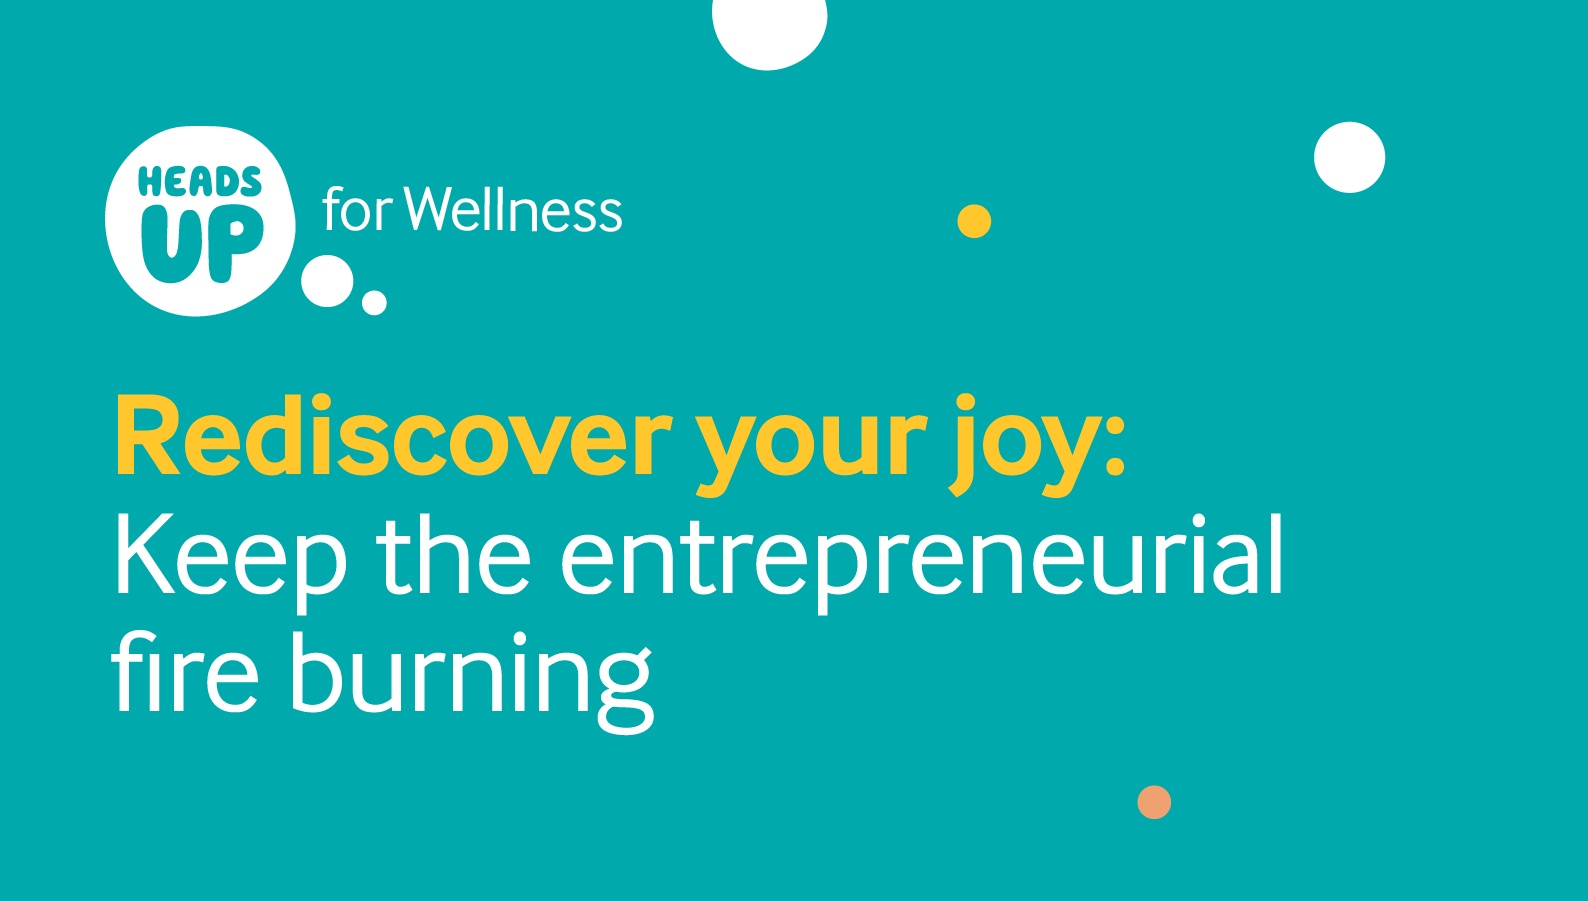 Rediscover your joy: How to keep the entrepreneurial fire burning